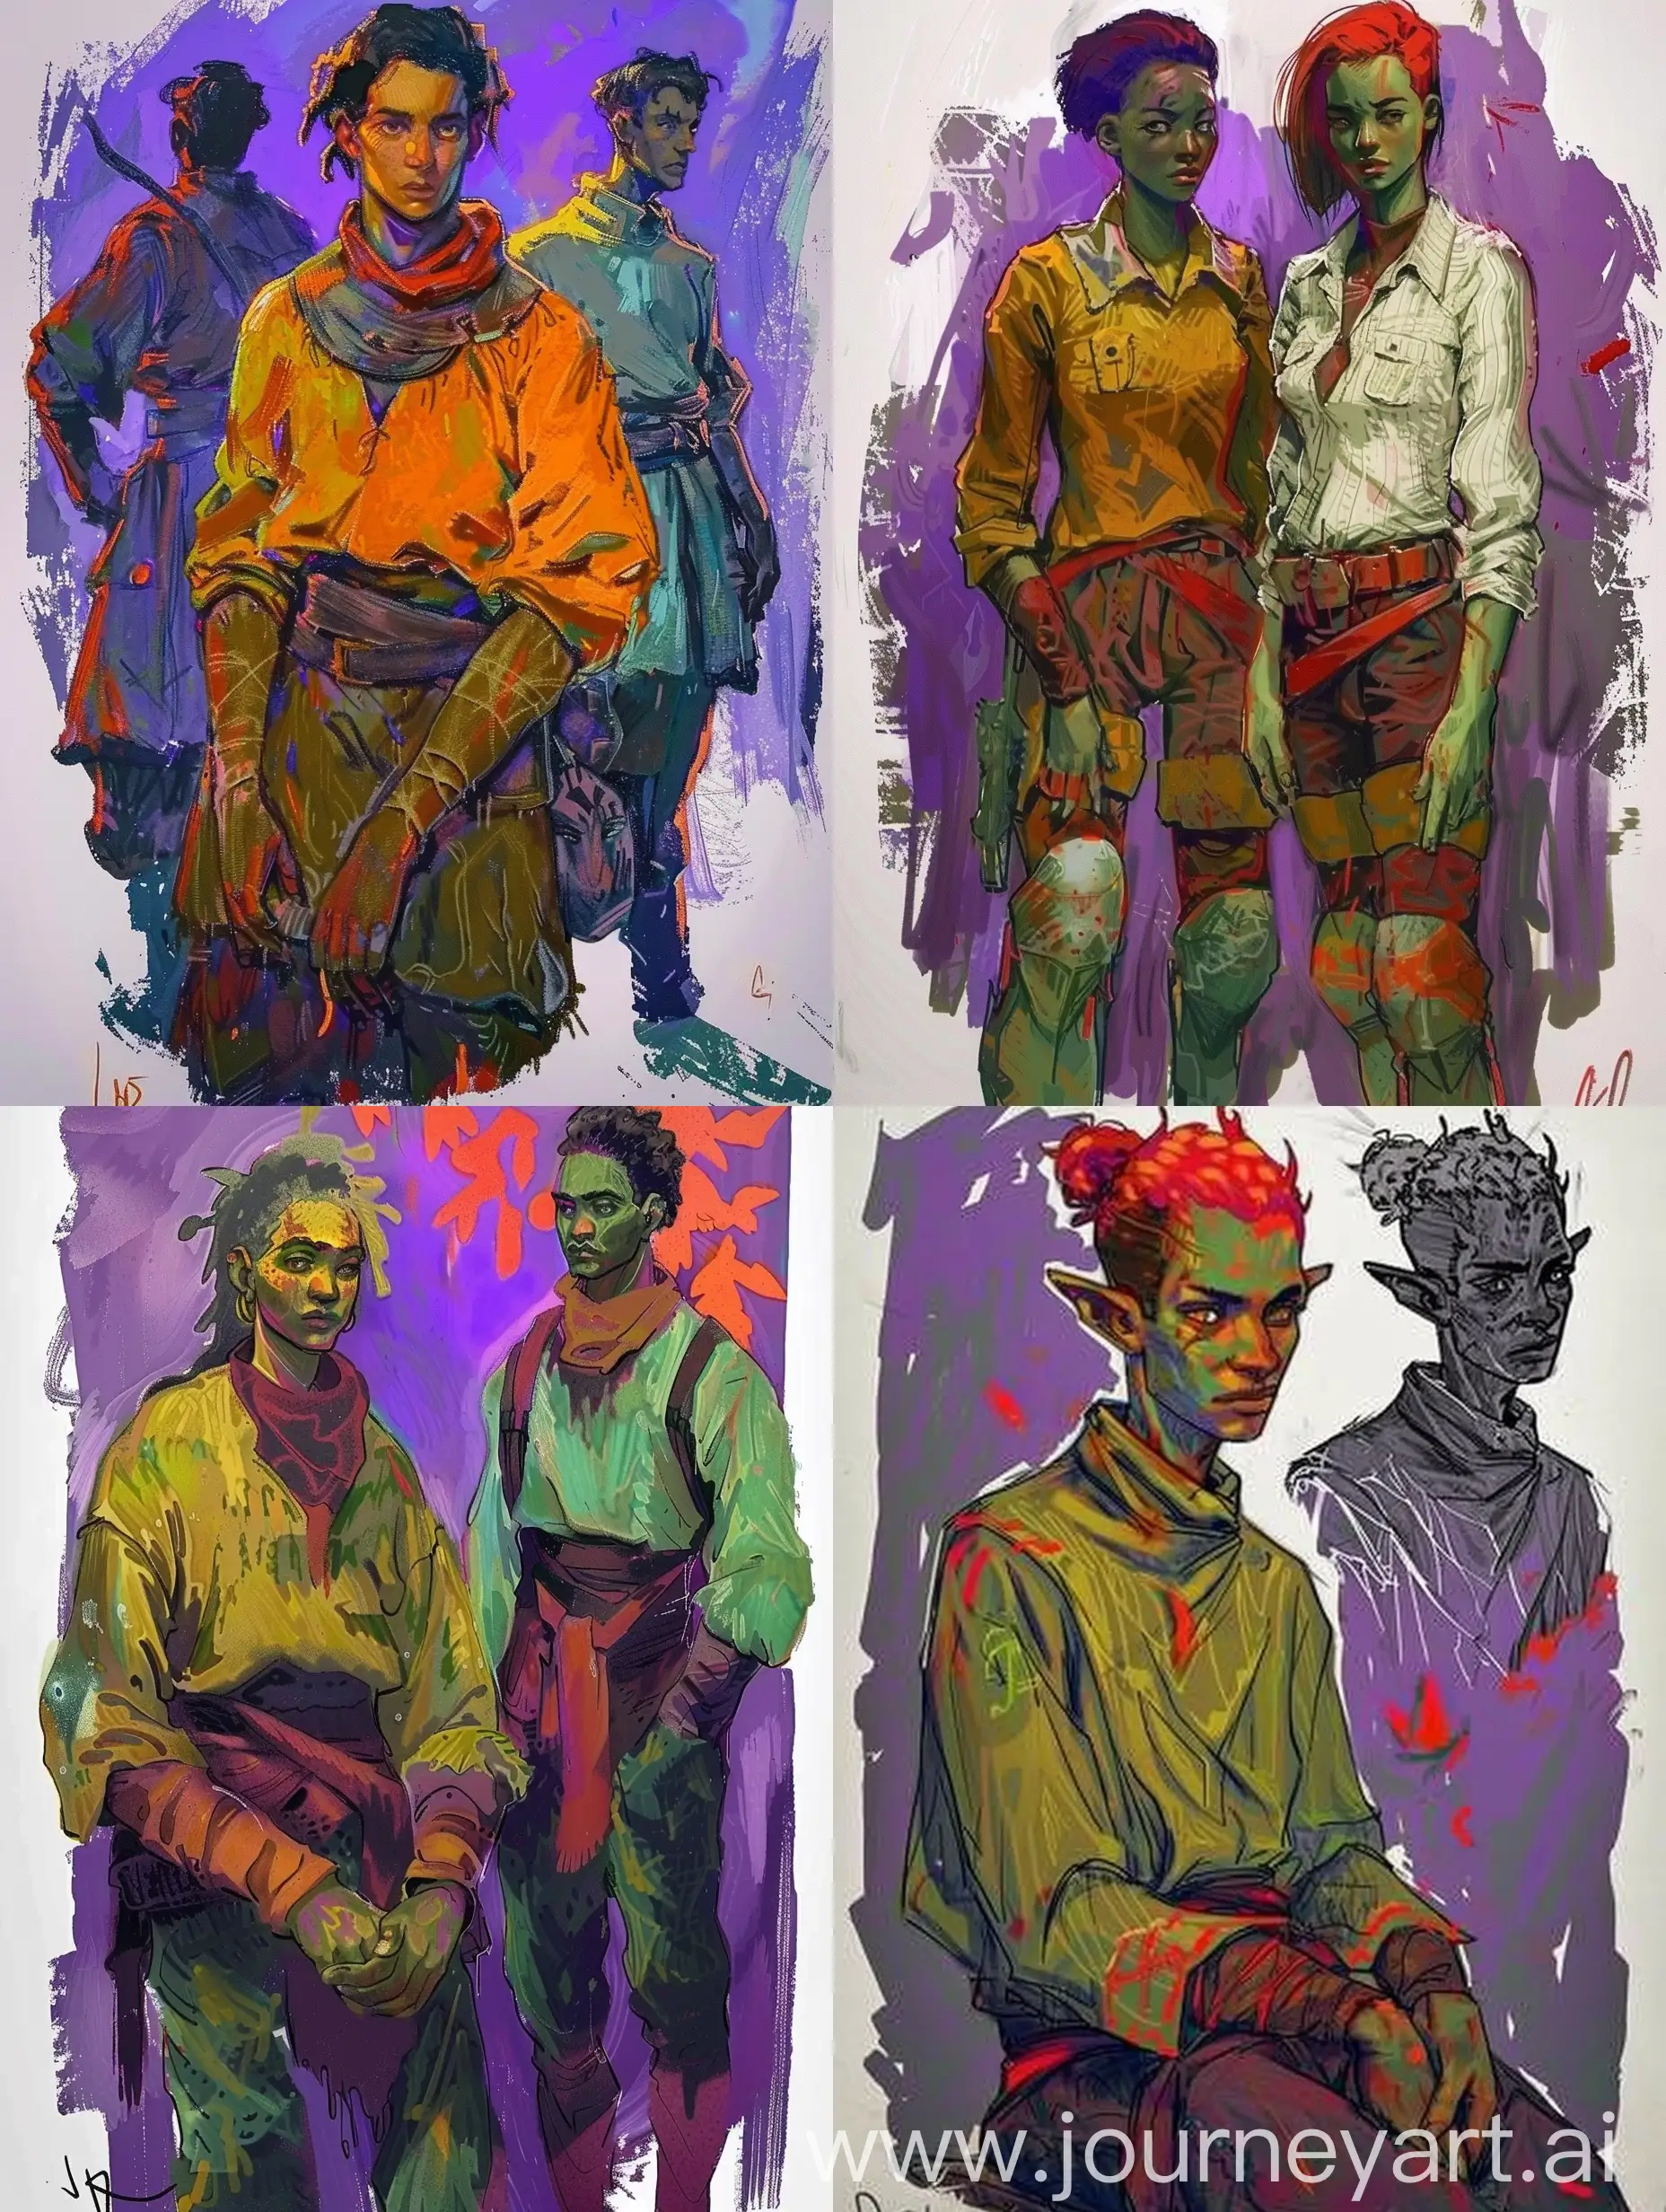 different character with same color palette and art style in the given image